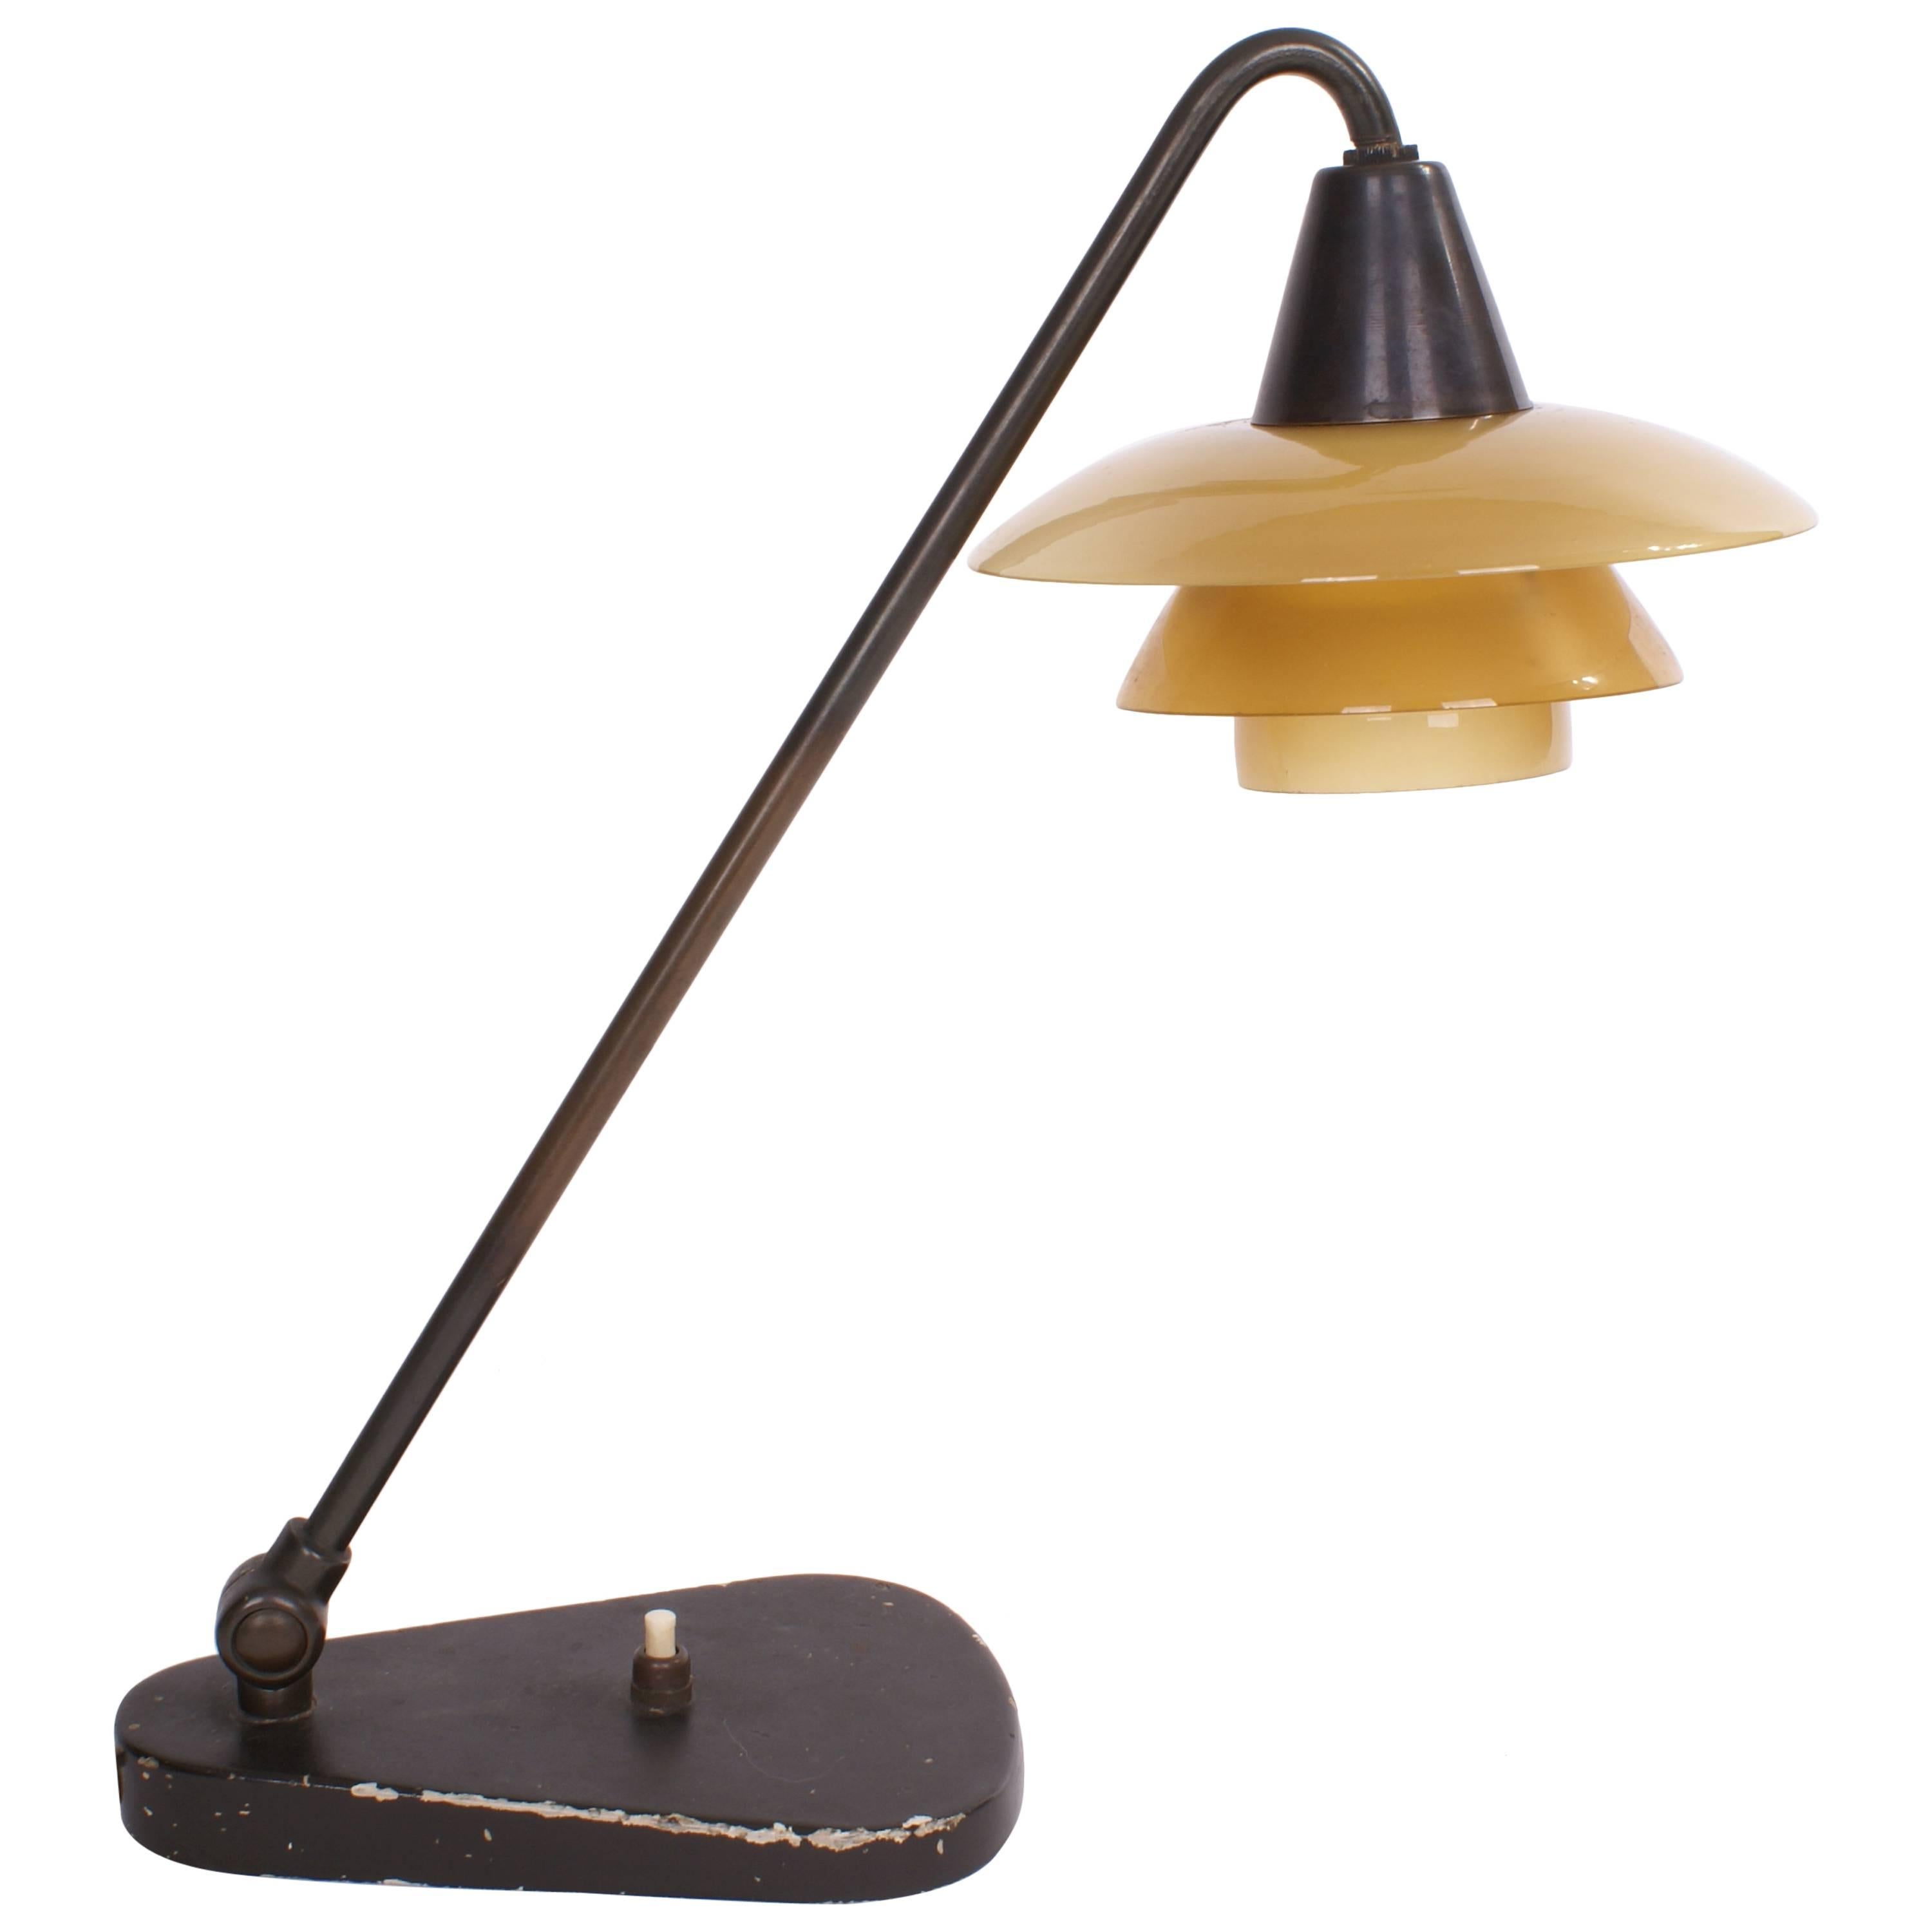 Poul Henningsen PH 1/1 1940s Piano Lamp For Sale